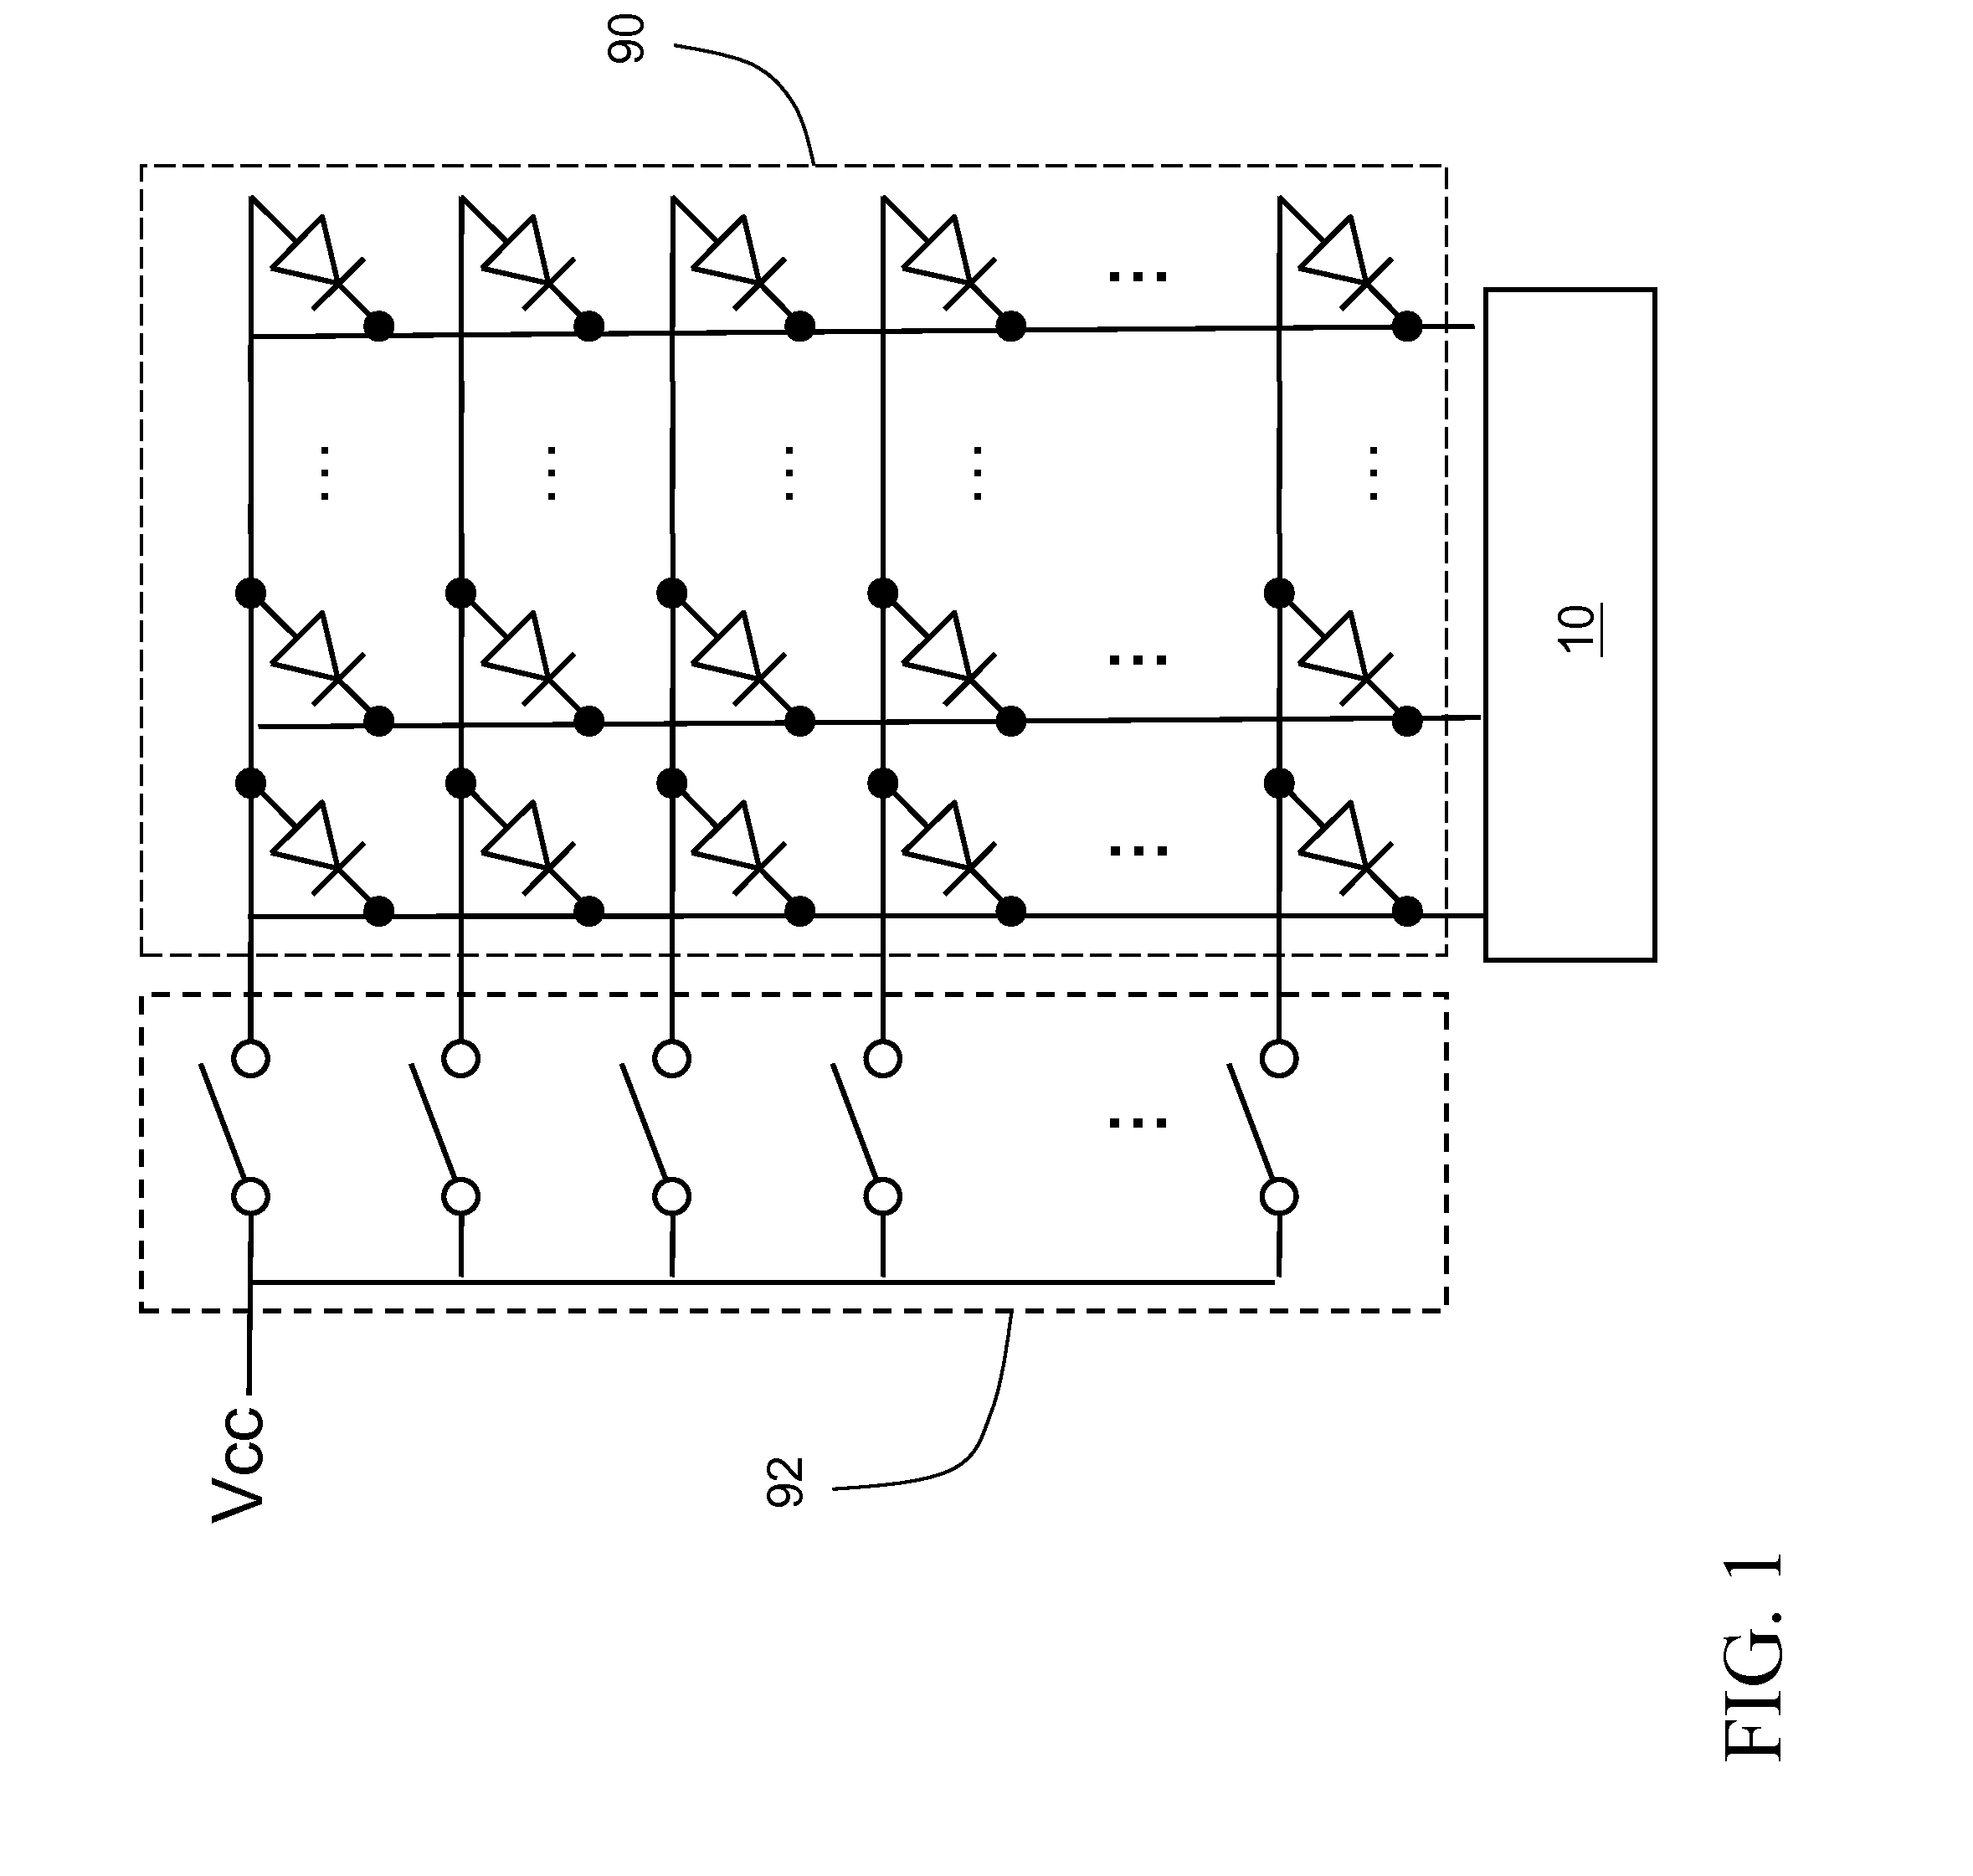 Scan-type display device control circuit